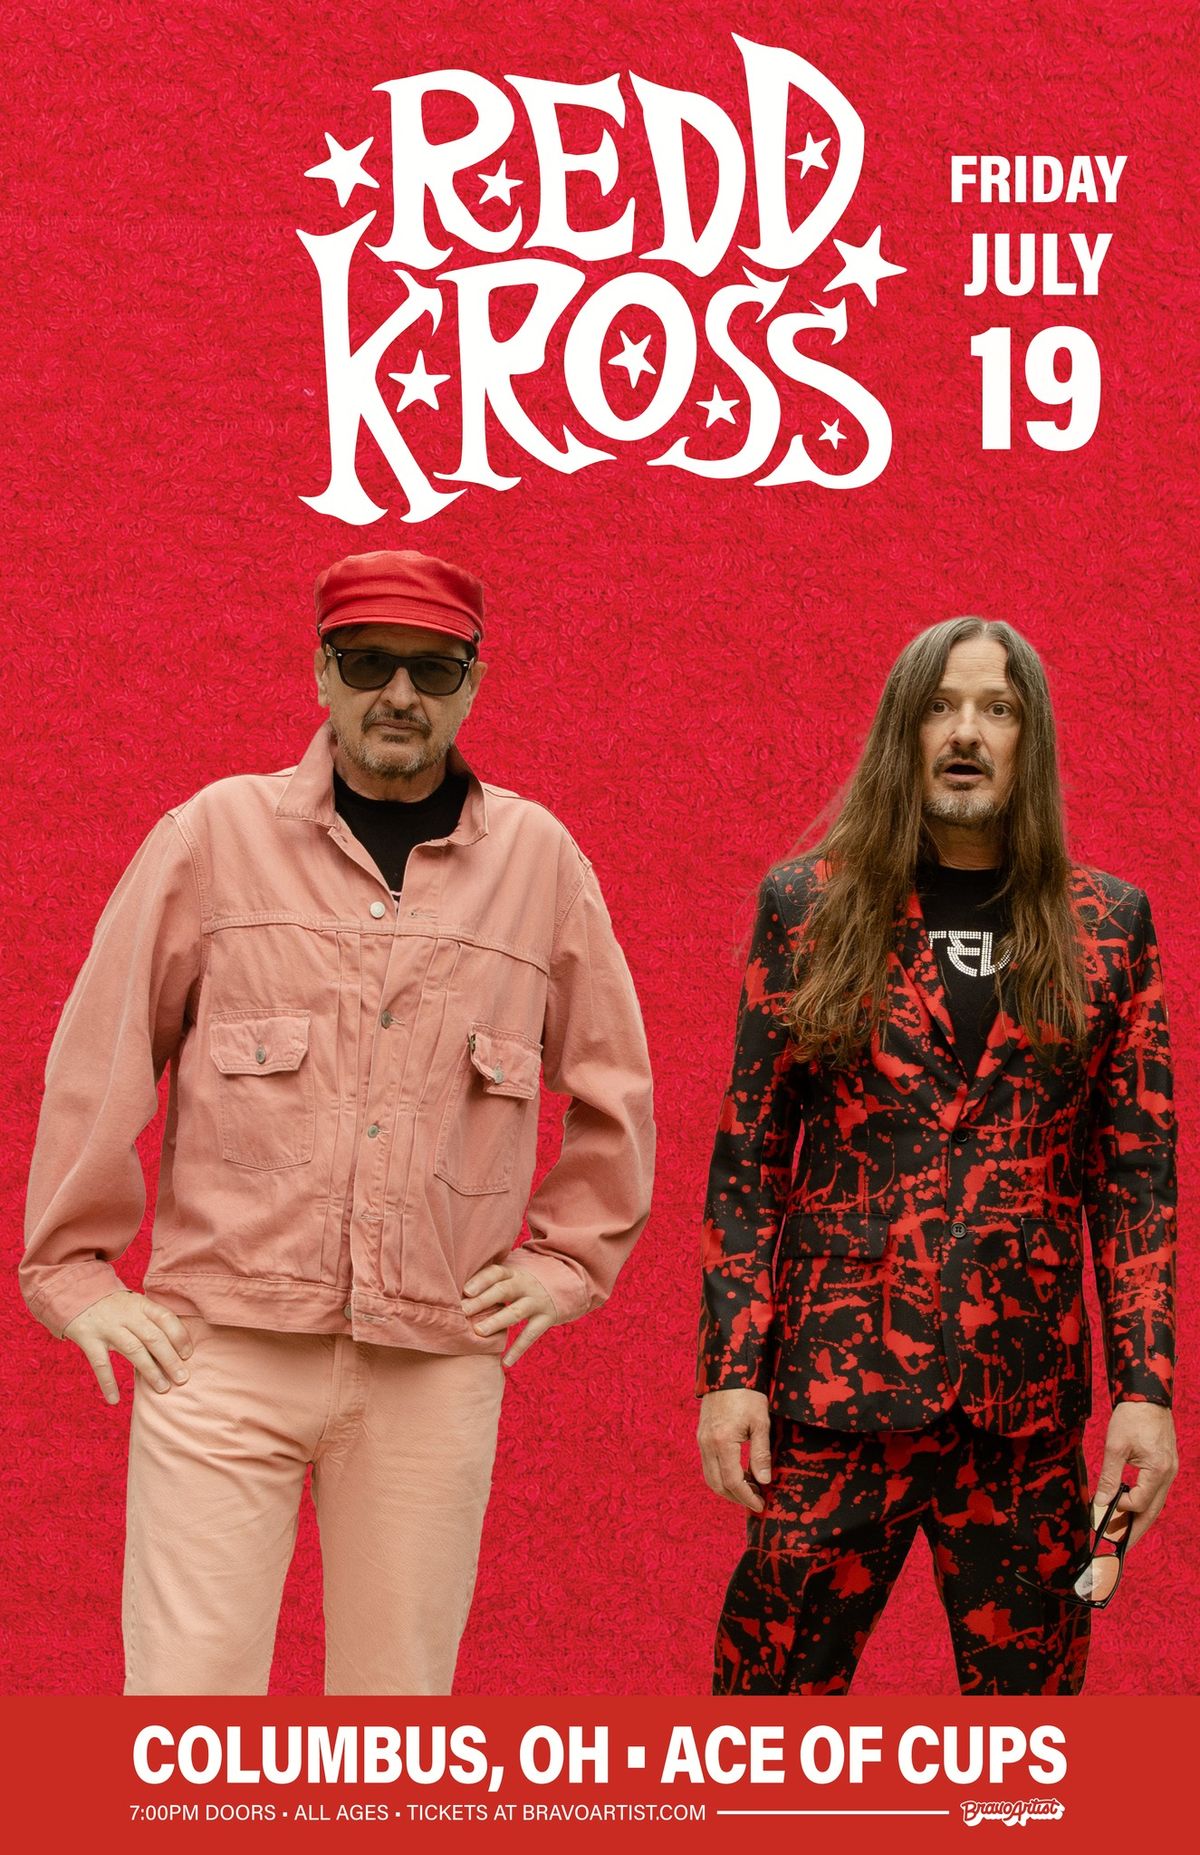 Redd Kross at Ace of Cups